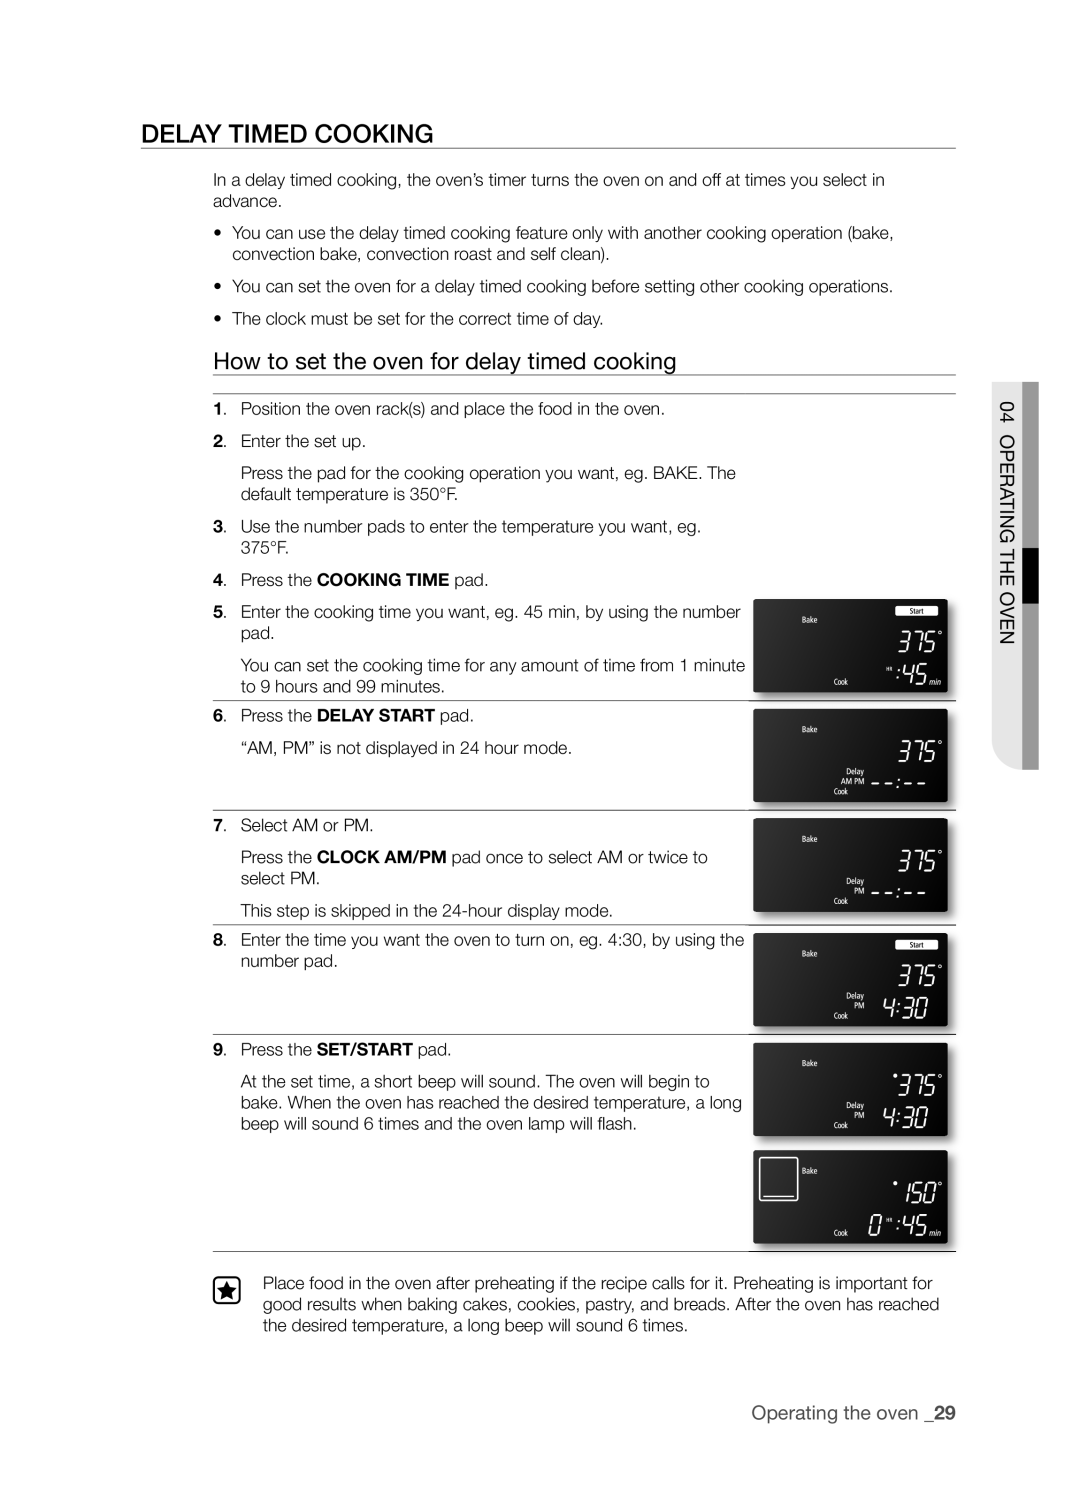 Samsung FTQ386LWX user manual Delay Timed Cooking, How to set the oven for delay timed cooking, Operating The Oven 